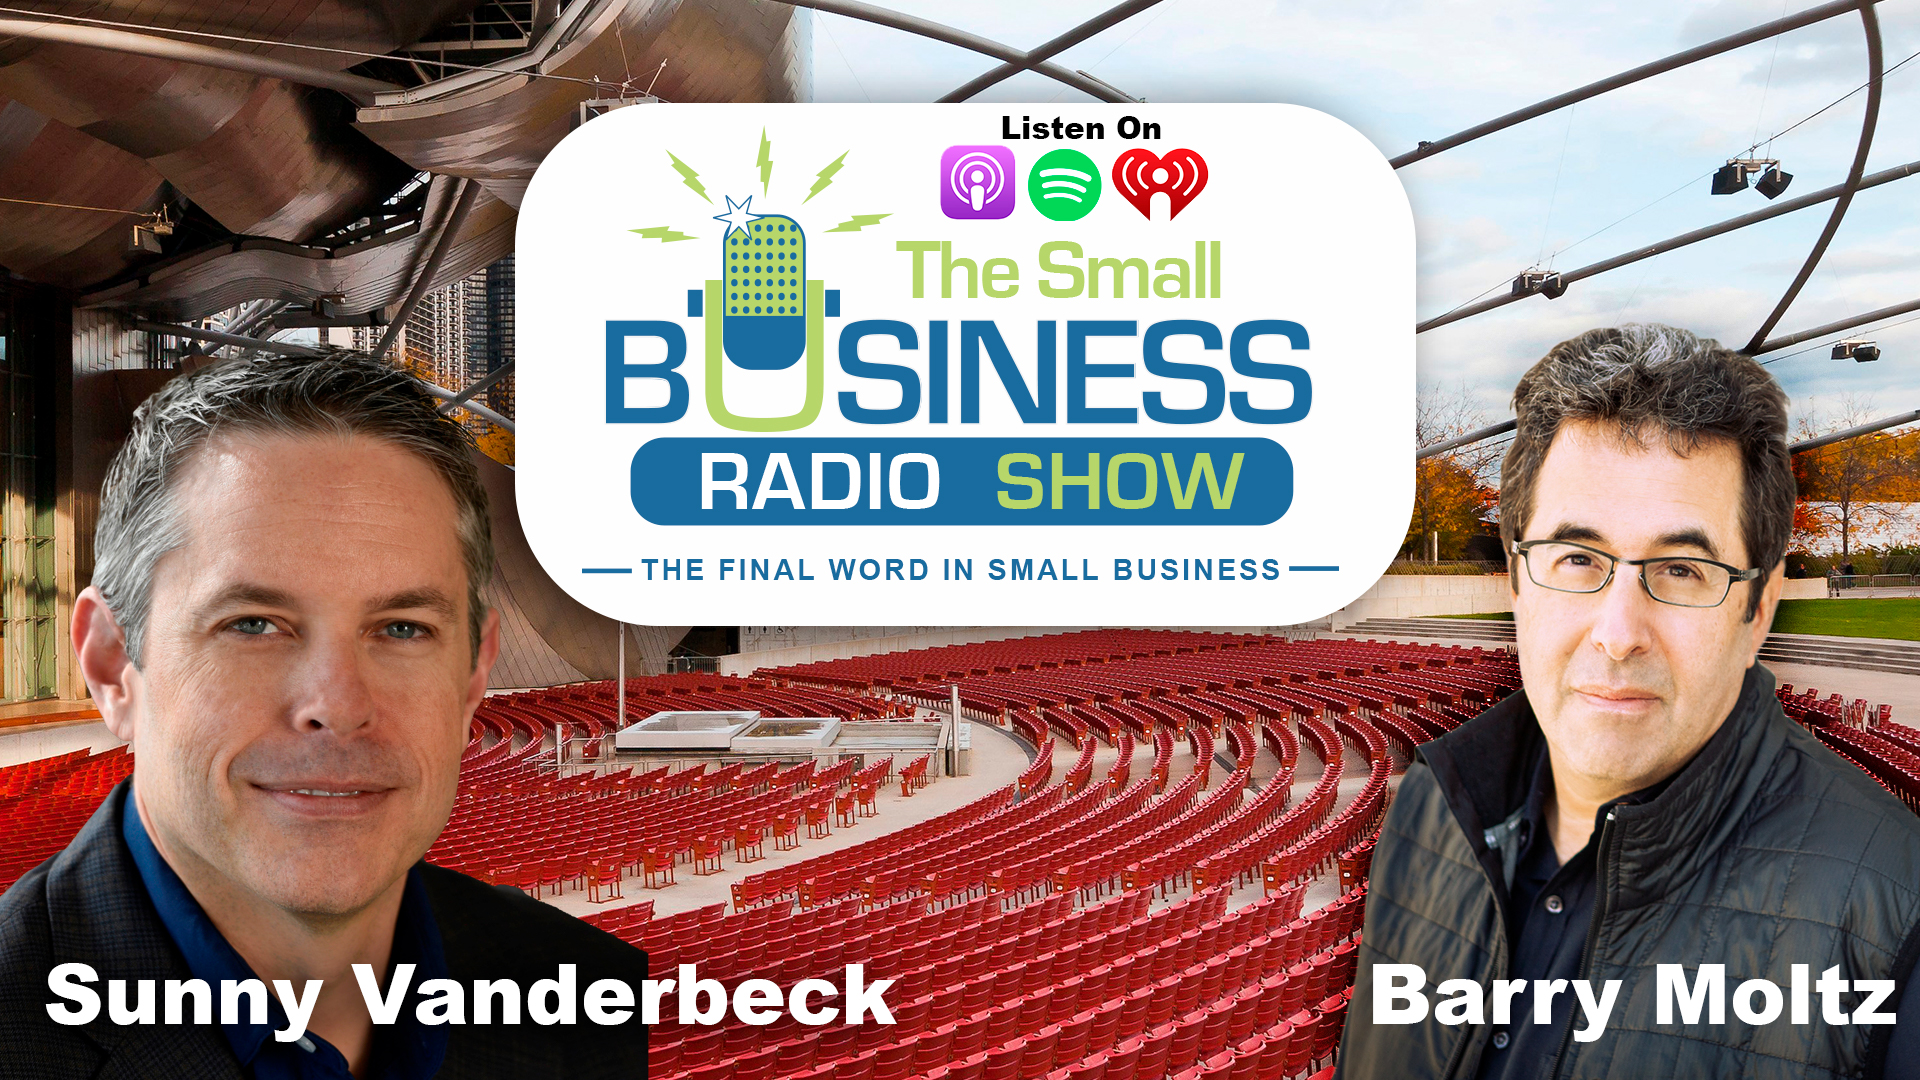 Sunny Vanderbeck on The Small Business Radio Show